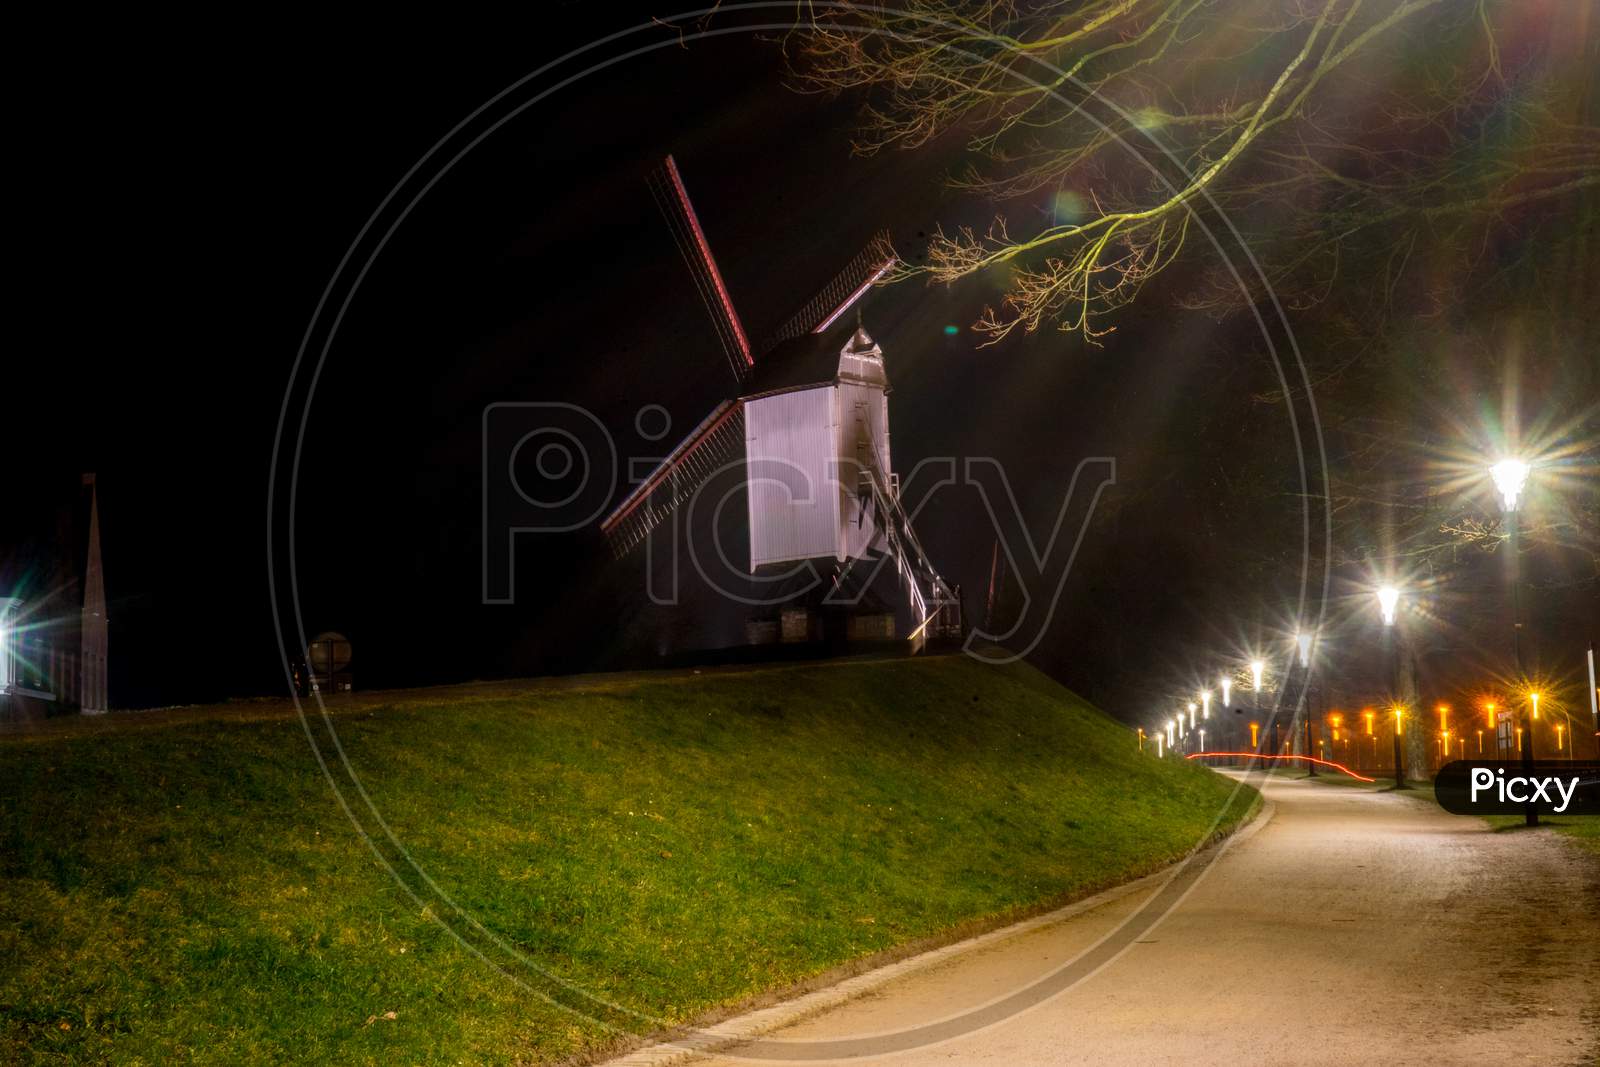 Belgium, Bruges, A Close Up Of A Street At Night With Windmill